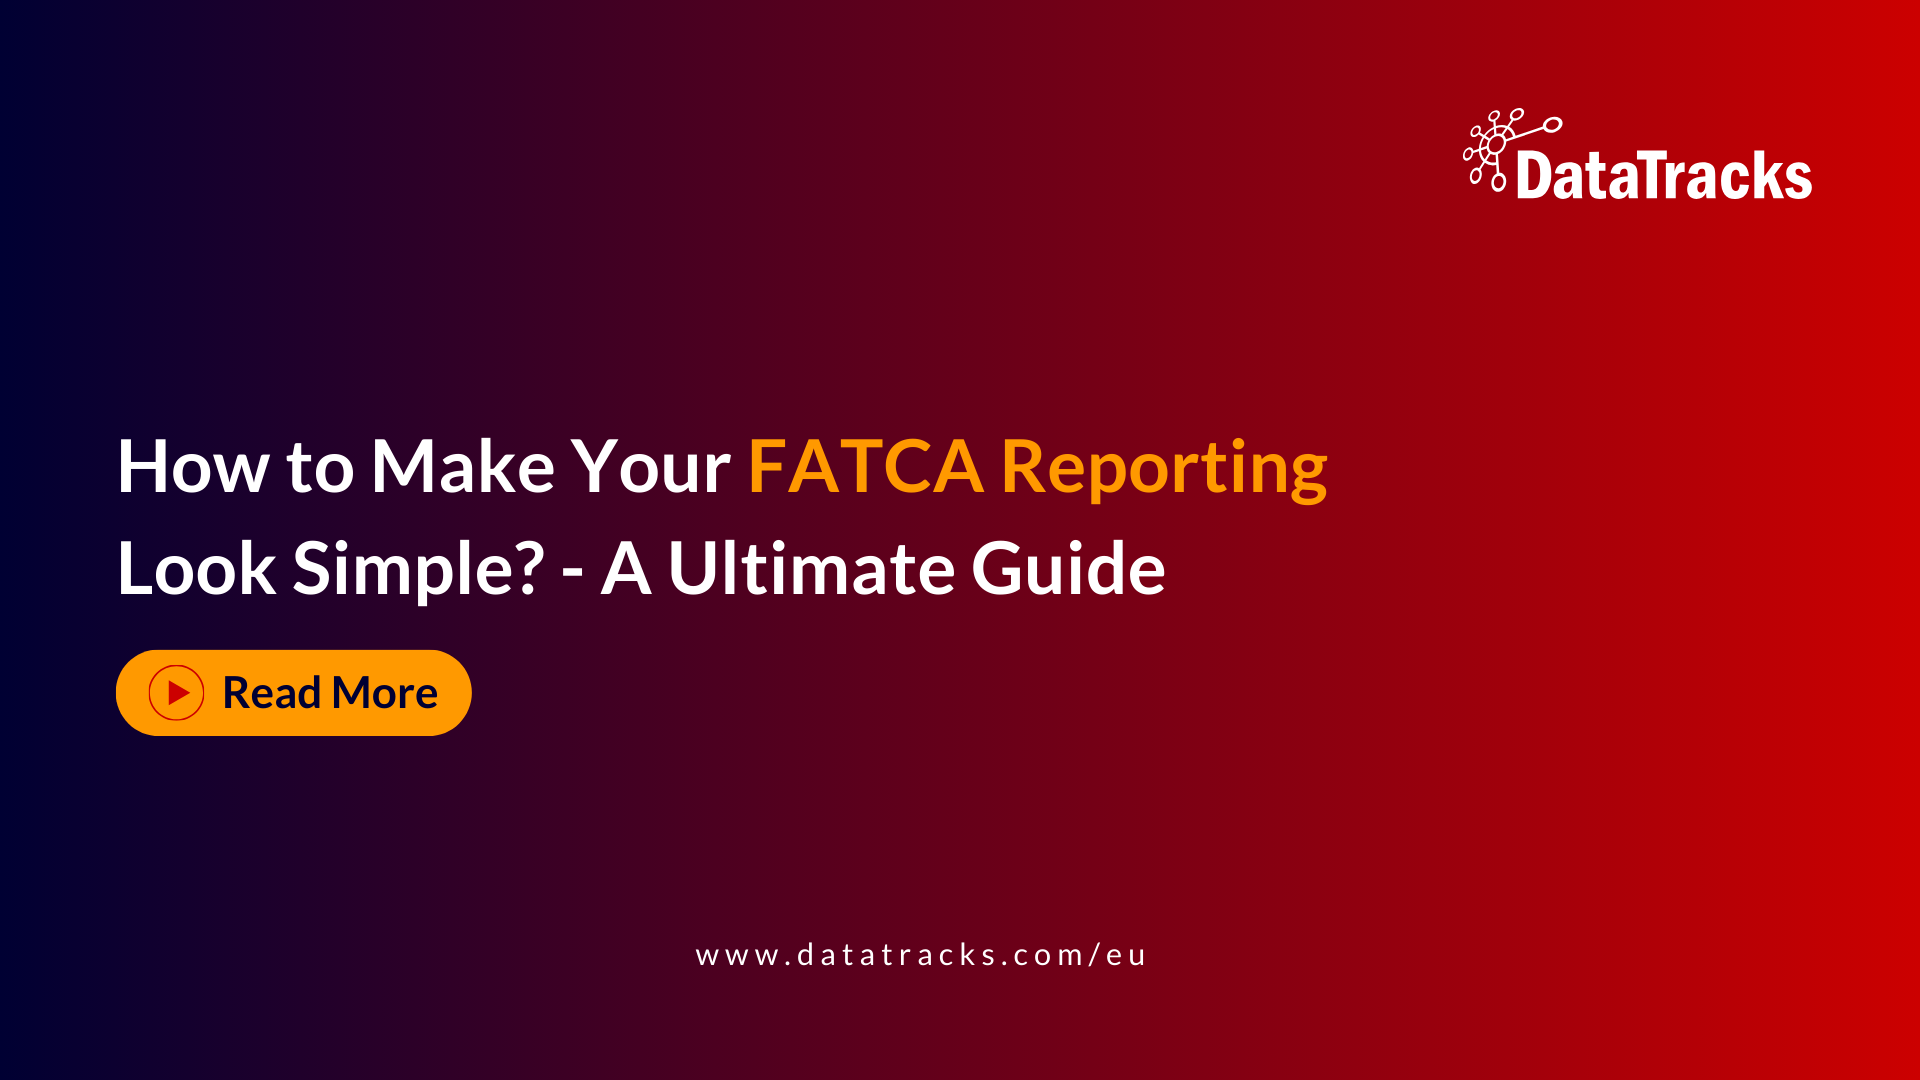 How to Make Your FATCA Reporting Look Simple?